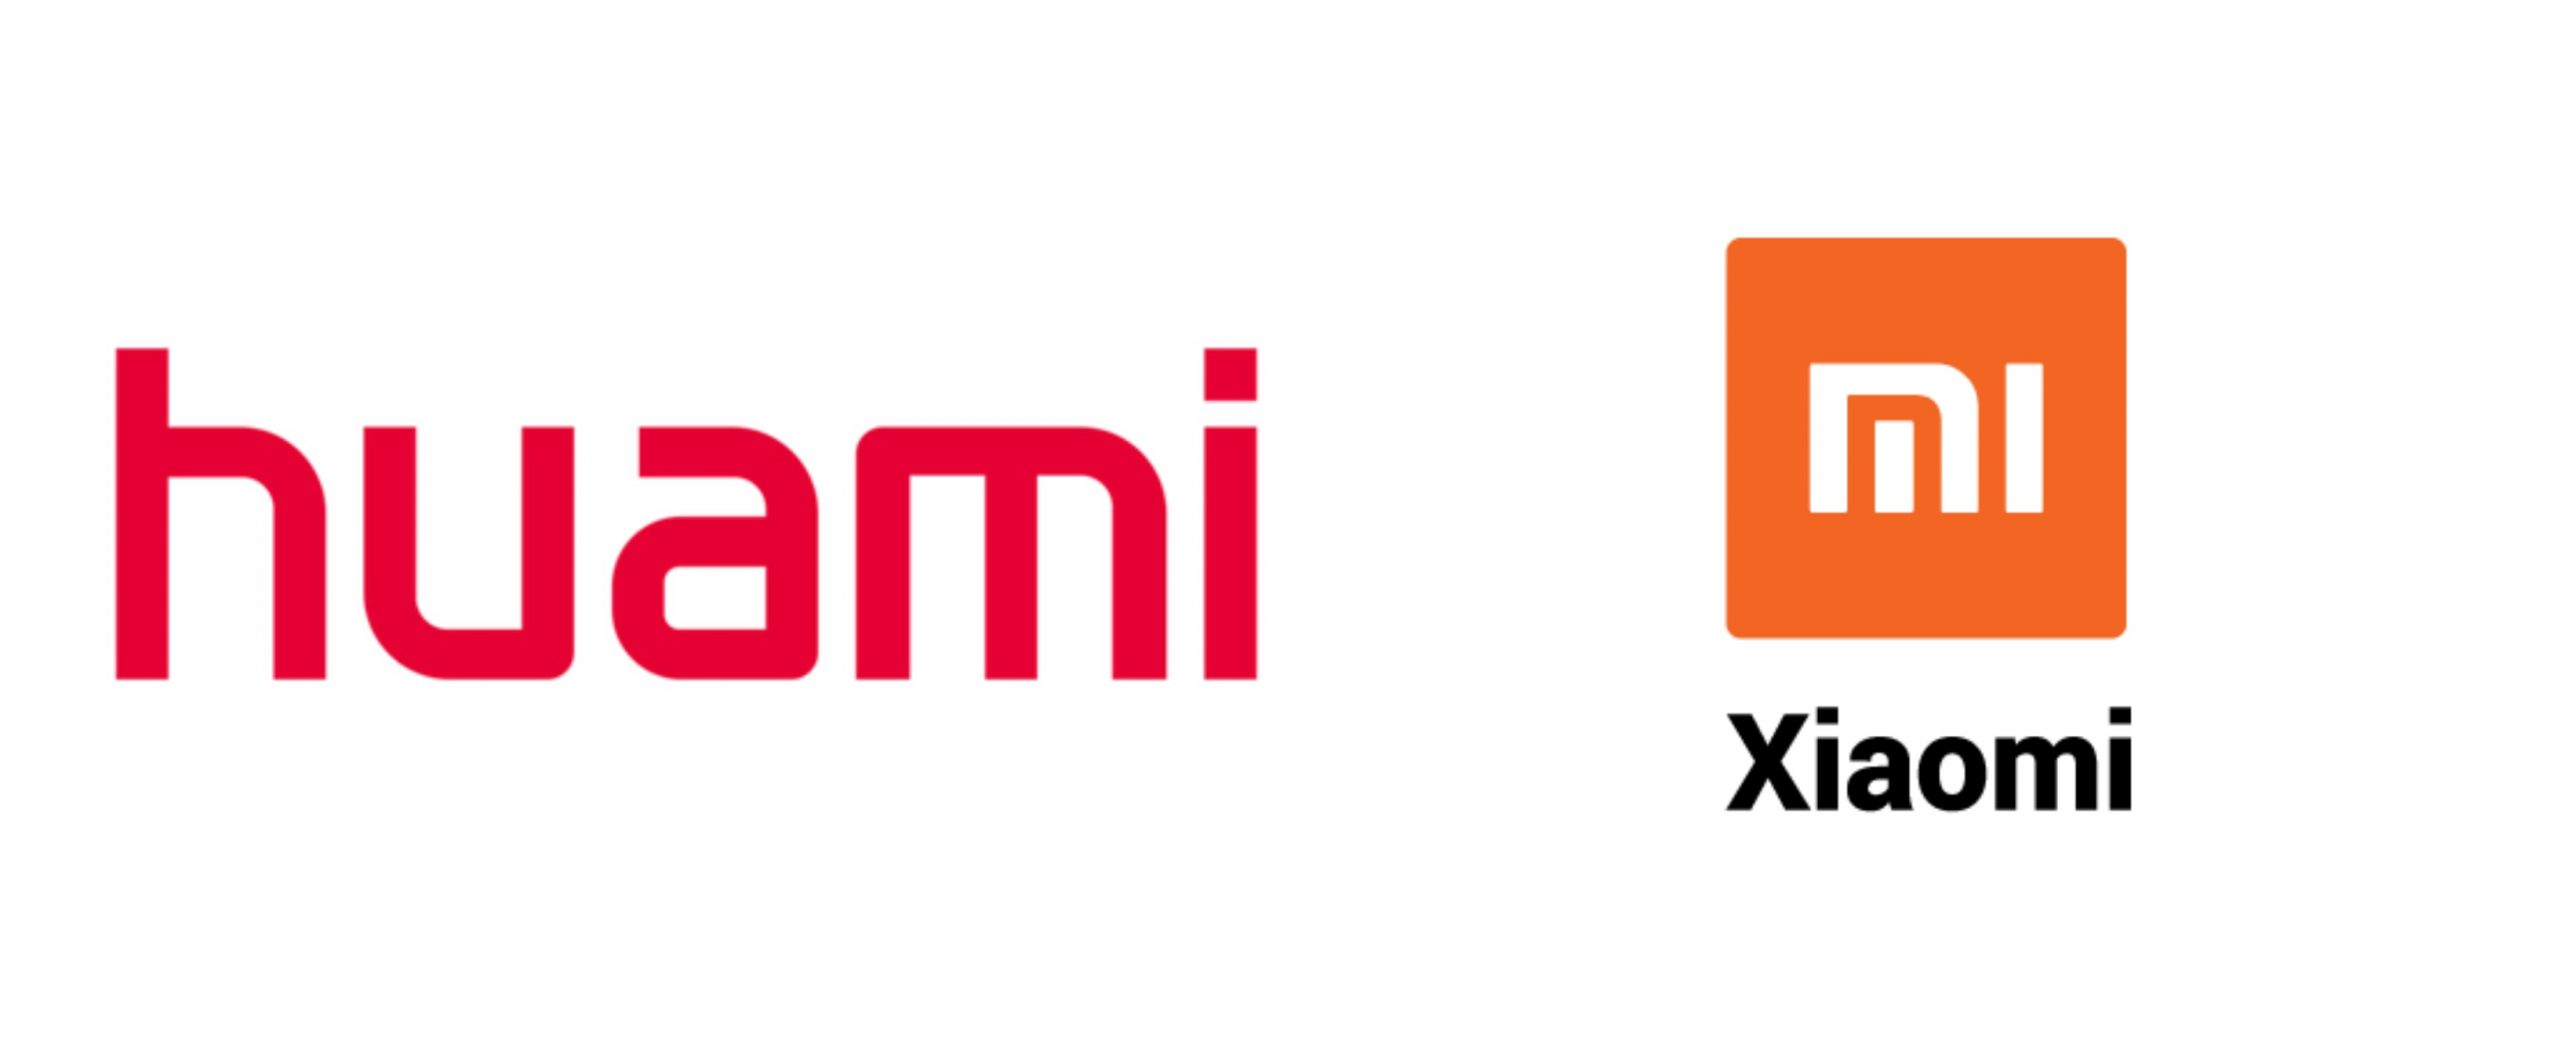 Huami will continue to make Smart Wearables for Xiaomi at least for the next three years